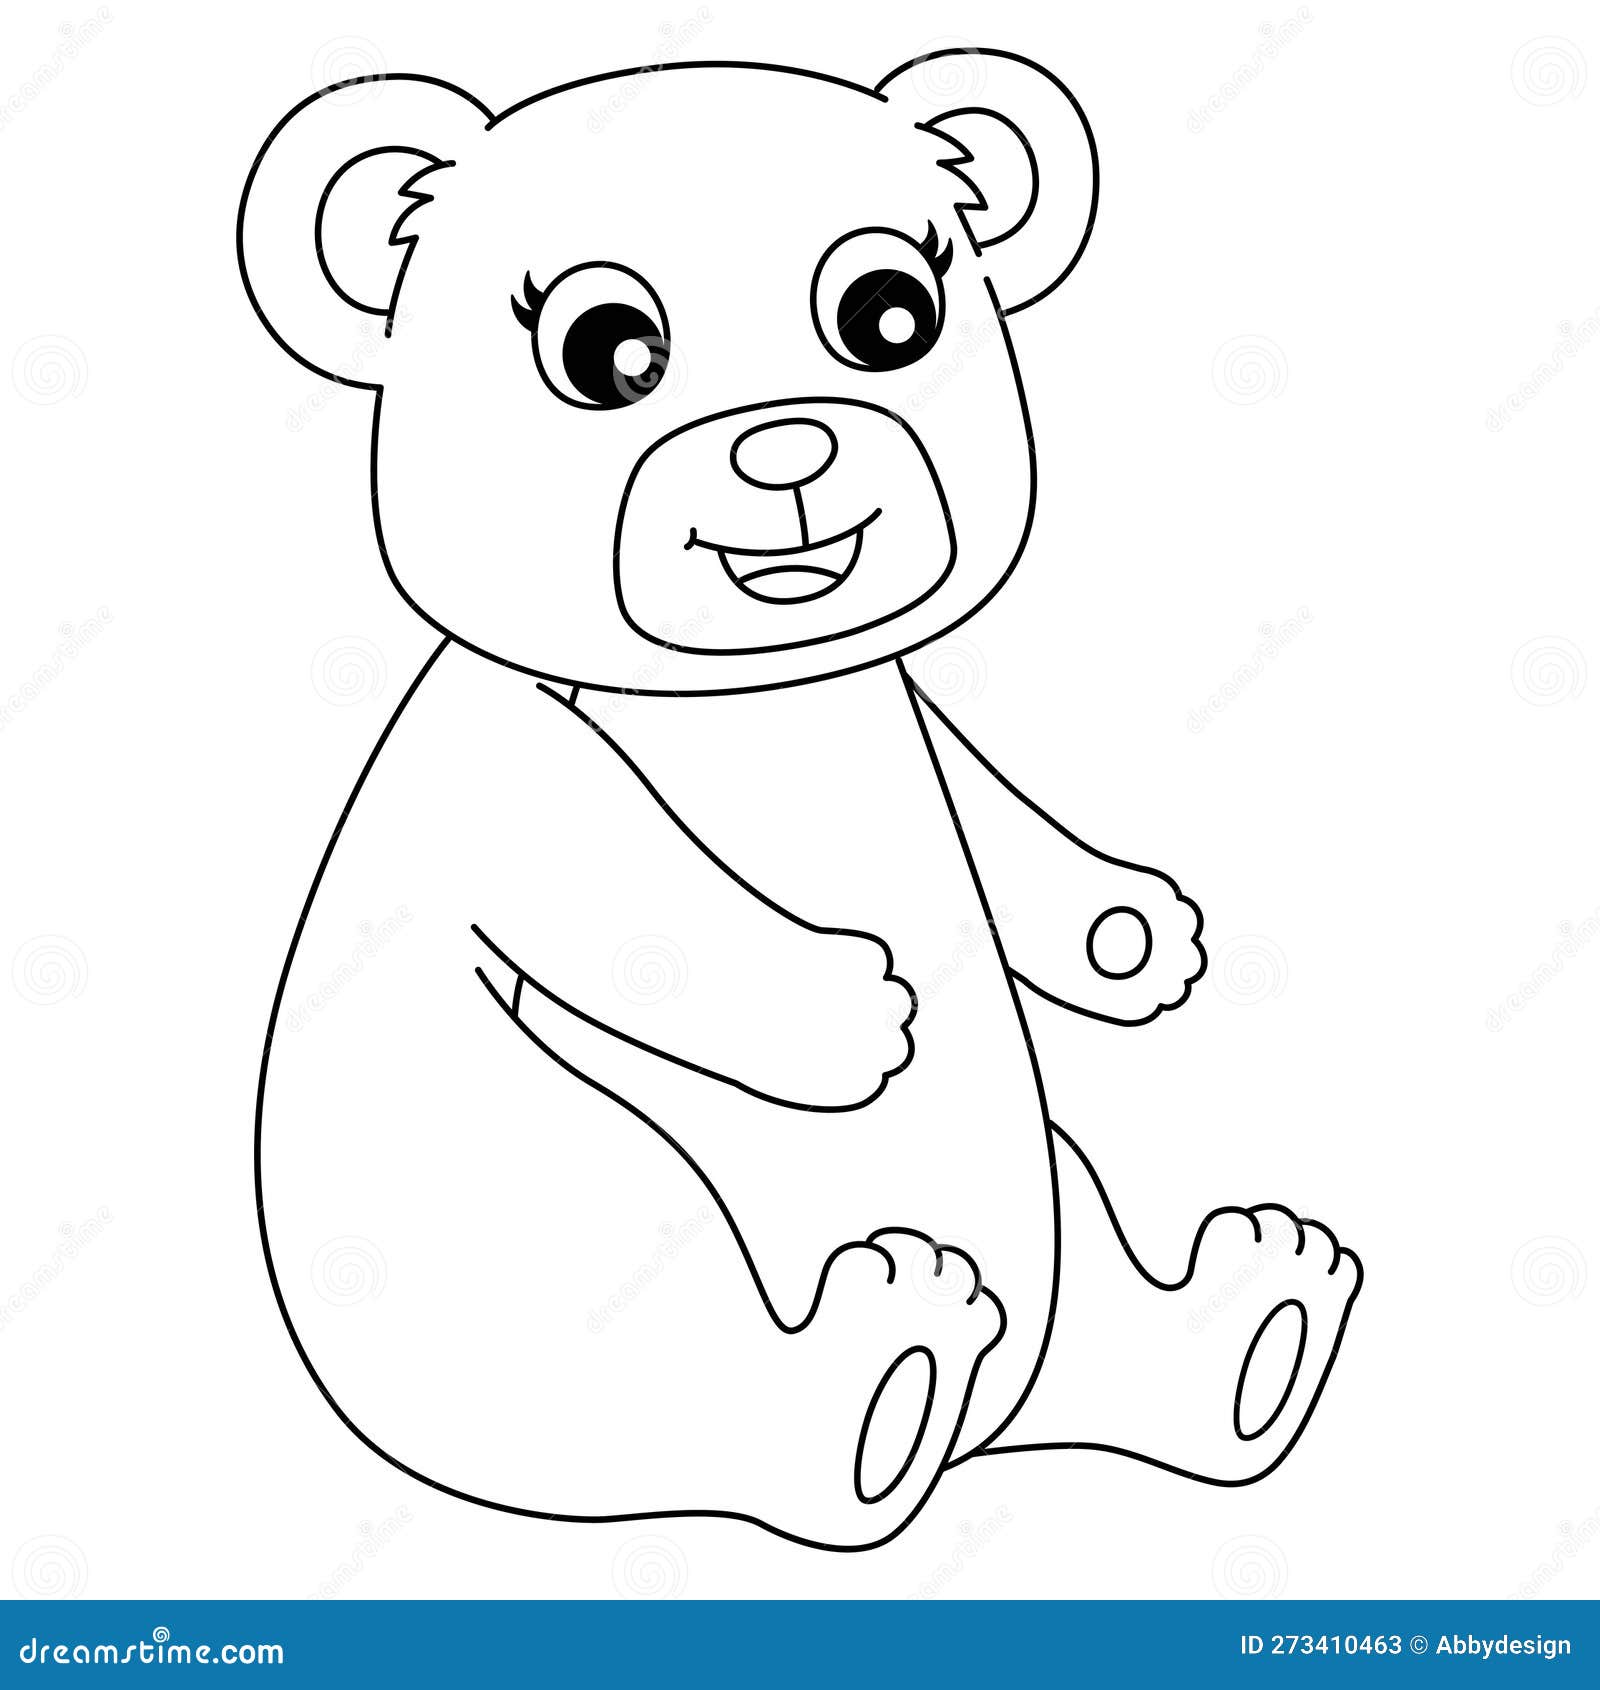 Sitting teddy bear isolated coloring page for kids stock vector